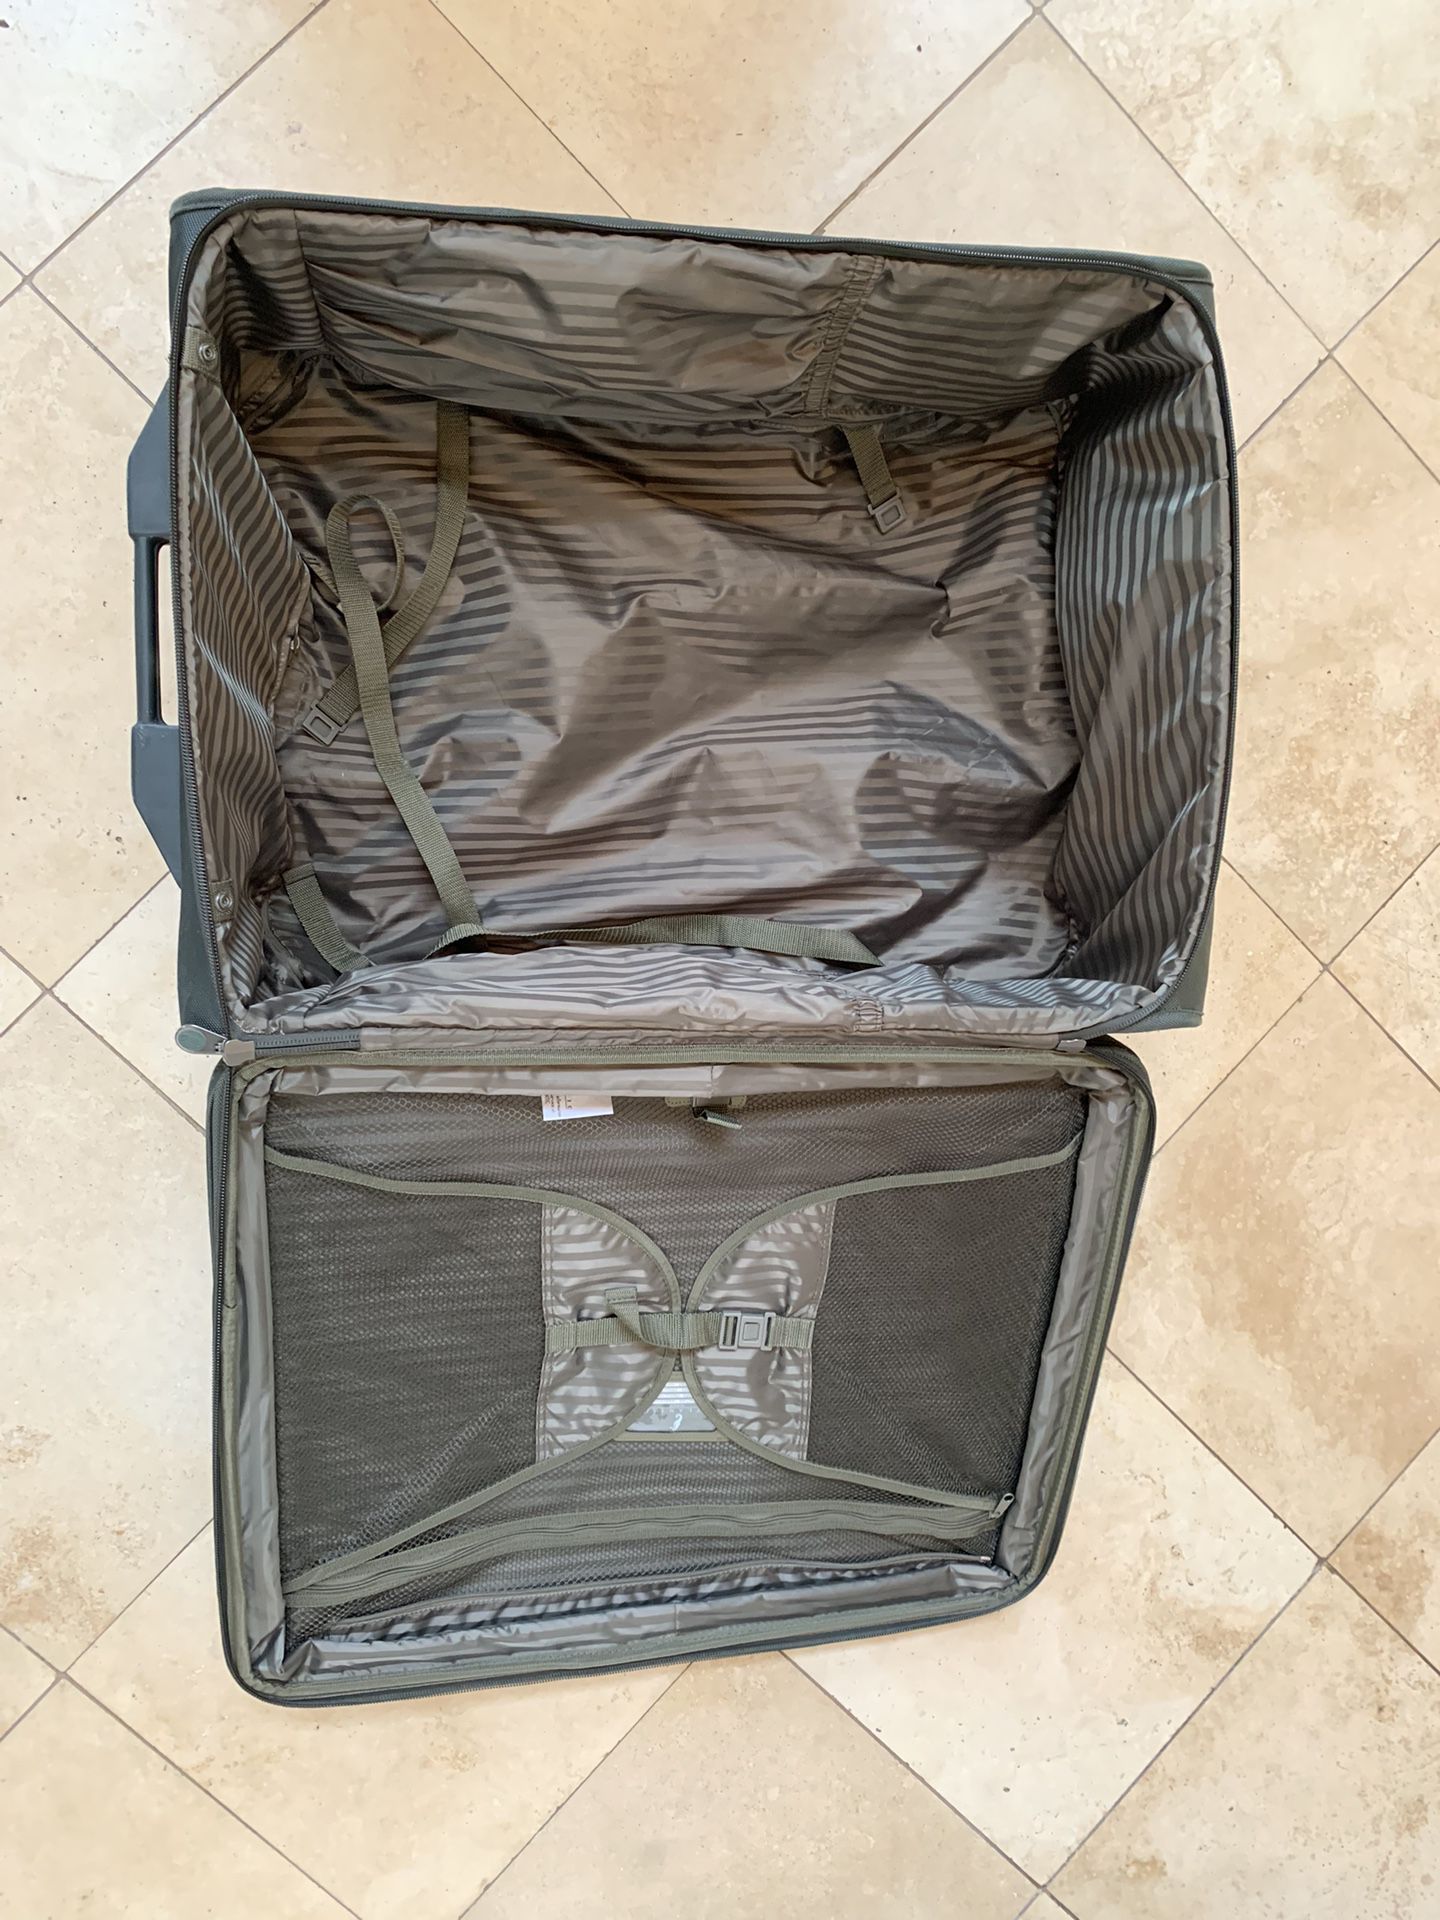 NEW Nordstrom Fabric/Vinyl Garment / Travel Bags for Sale in Toms River, NJ  - OfferUp